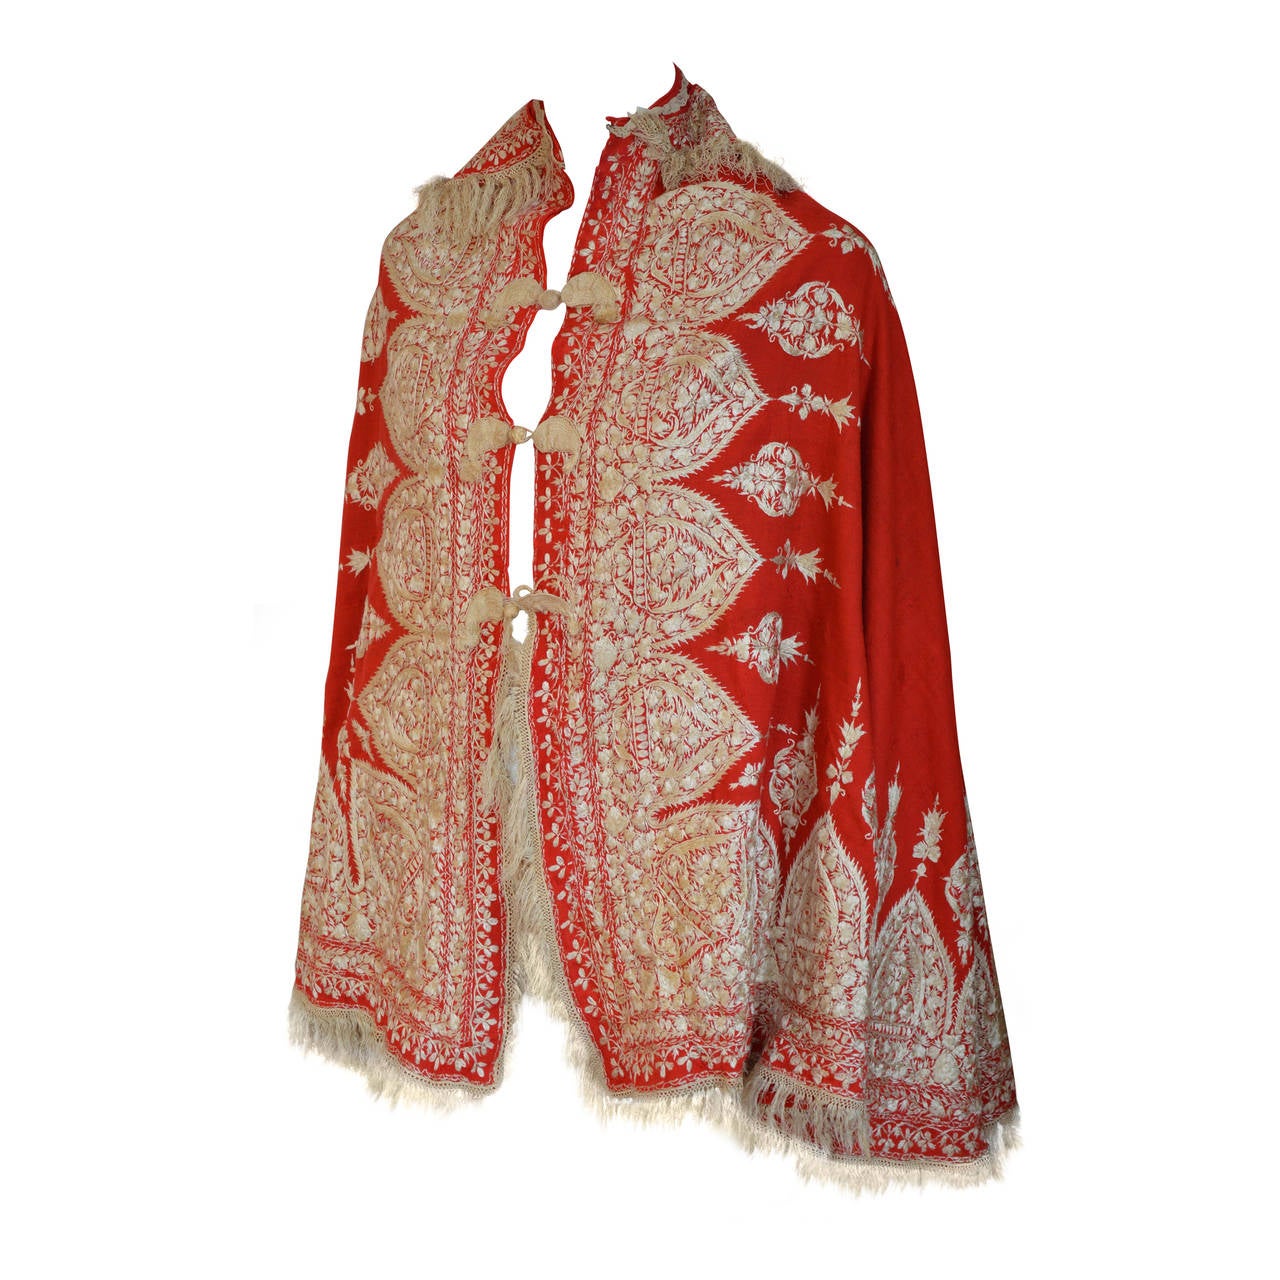 End of 19th century French Cape made of an Indian Embroidered Cashmere Shawl